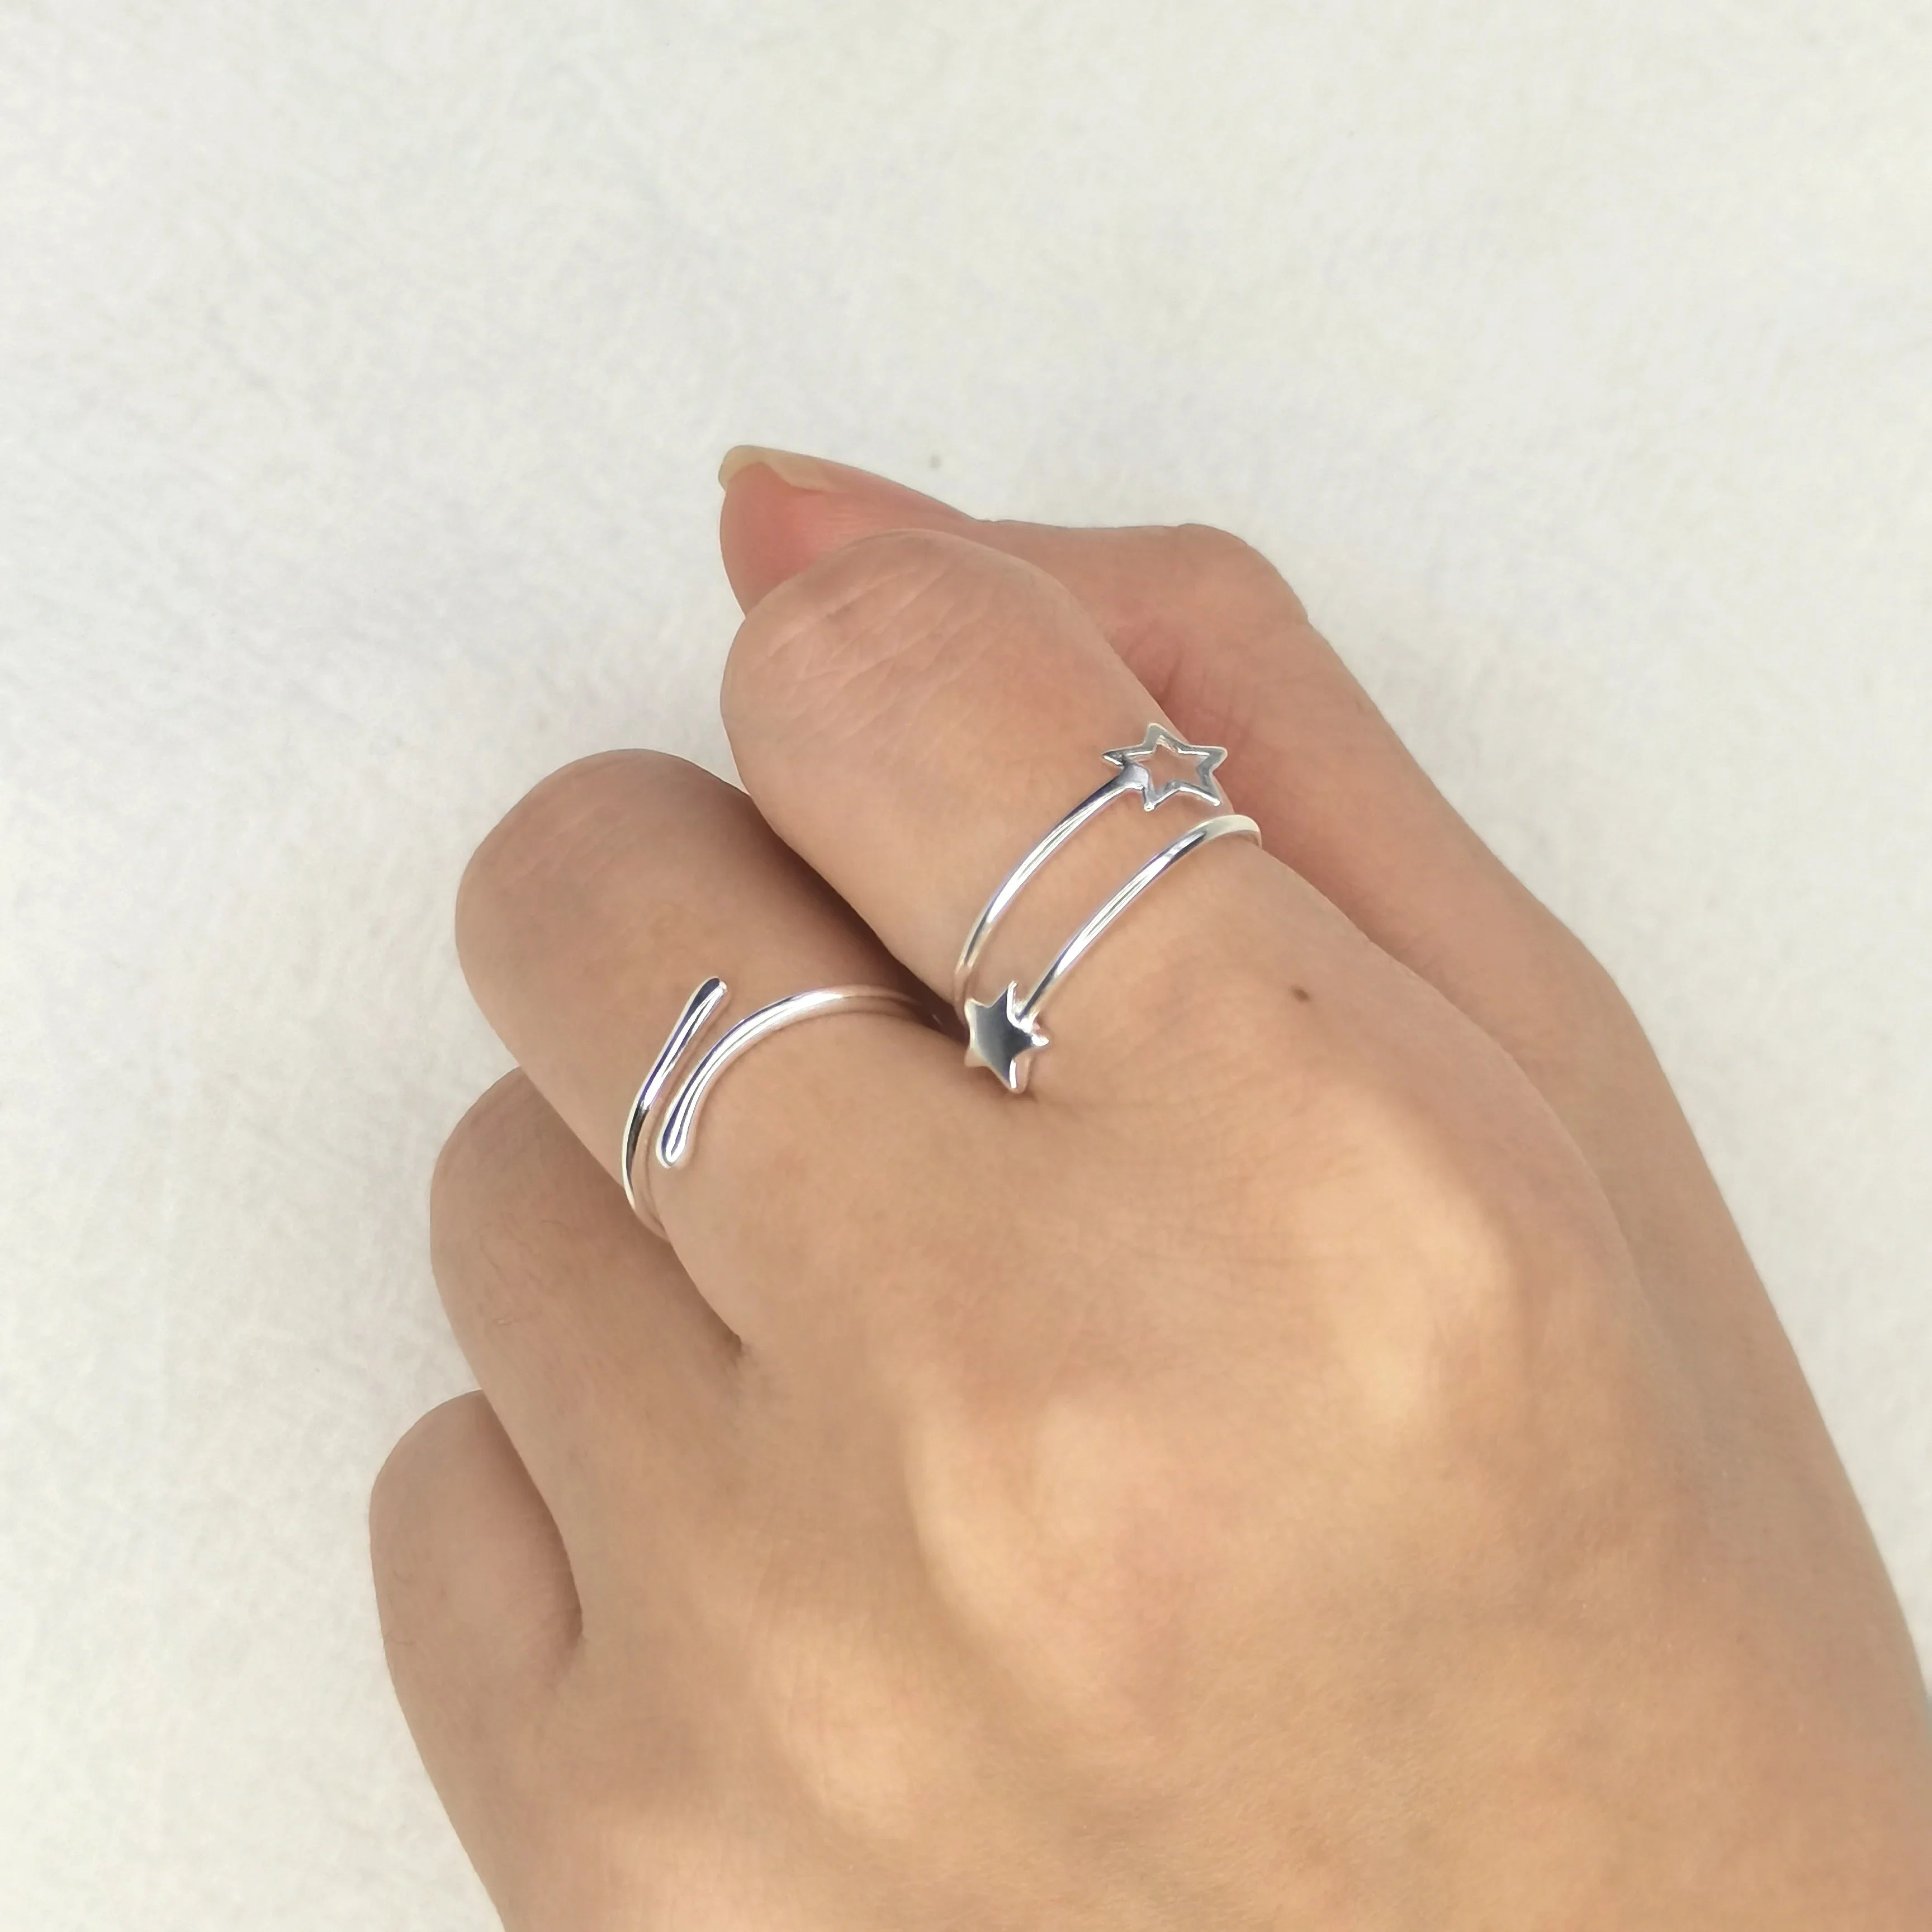 Sterling Silver Geometric Adjustable Ring For Fashion Women Party Fine Jewelry Minimalist Punk Accessories